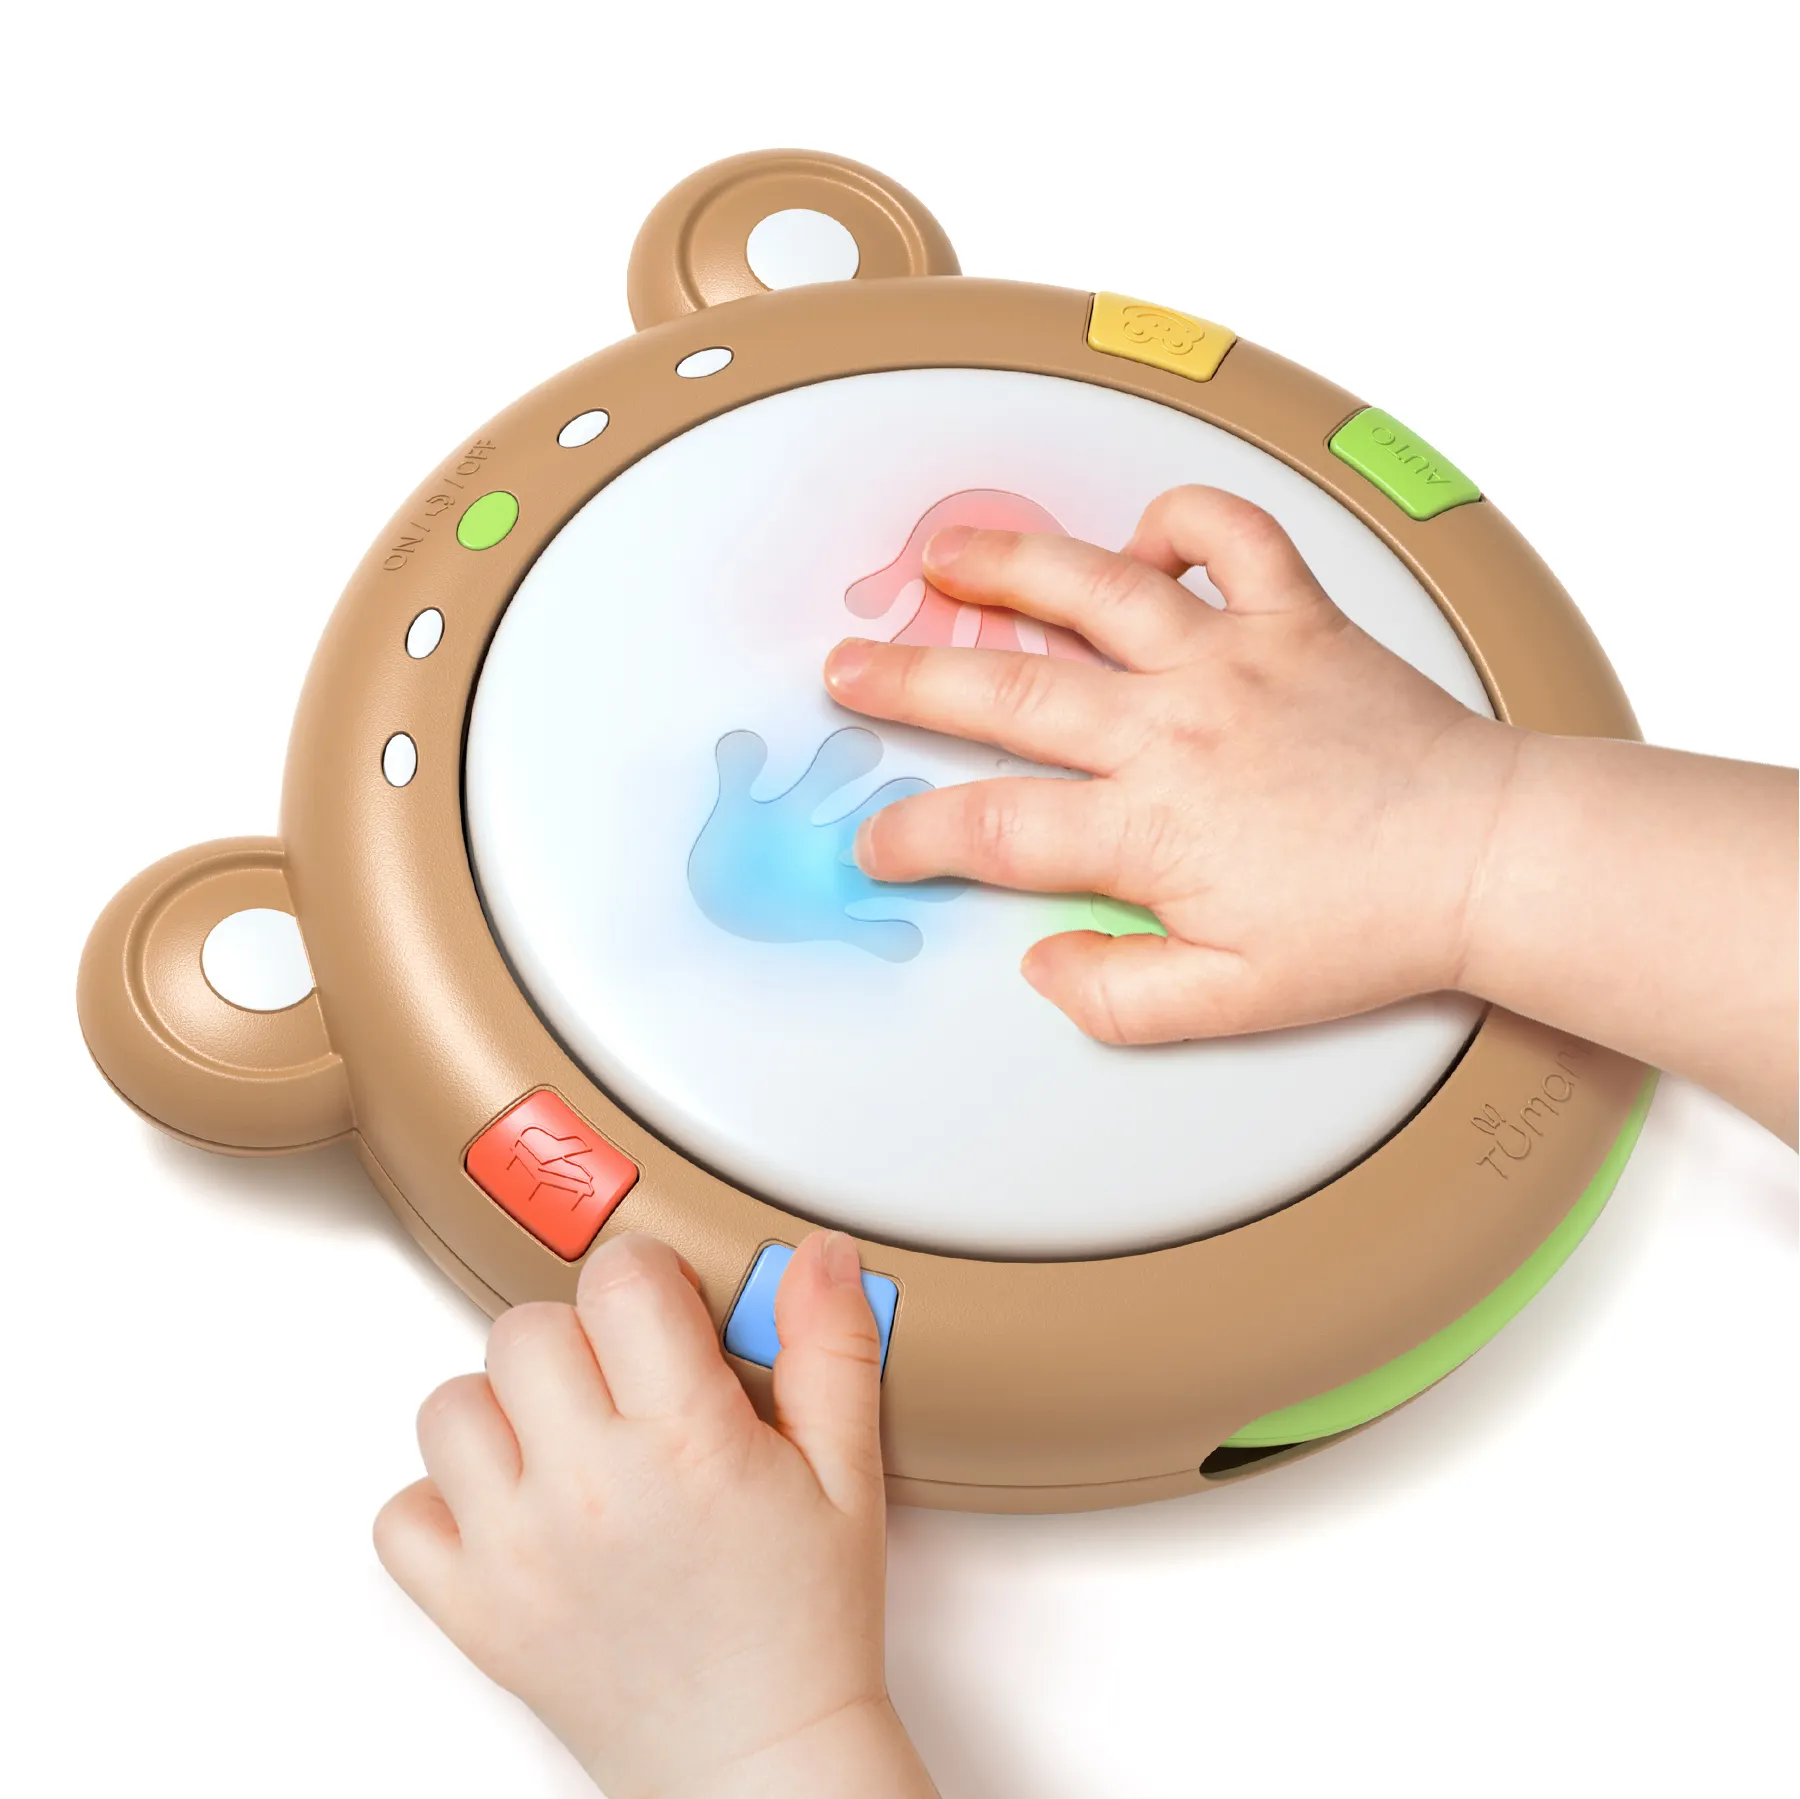 Tumama Kids Lovely Bear Shaped Interactive Baby Music Instrument Toy With Soft Light Baby Play Plastic Musical Hand Drum Toy